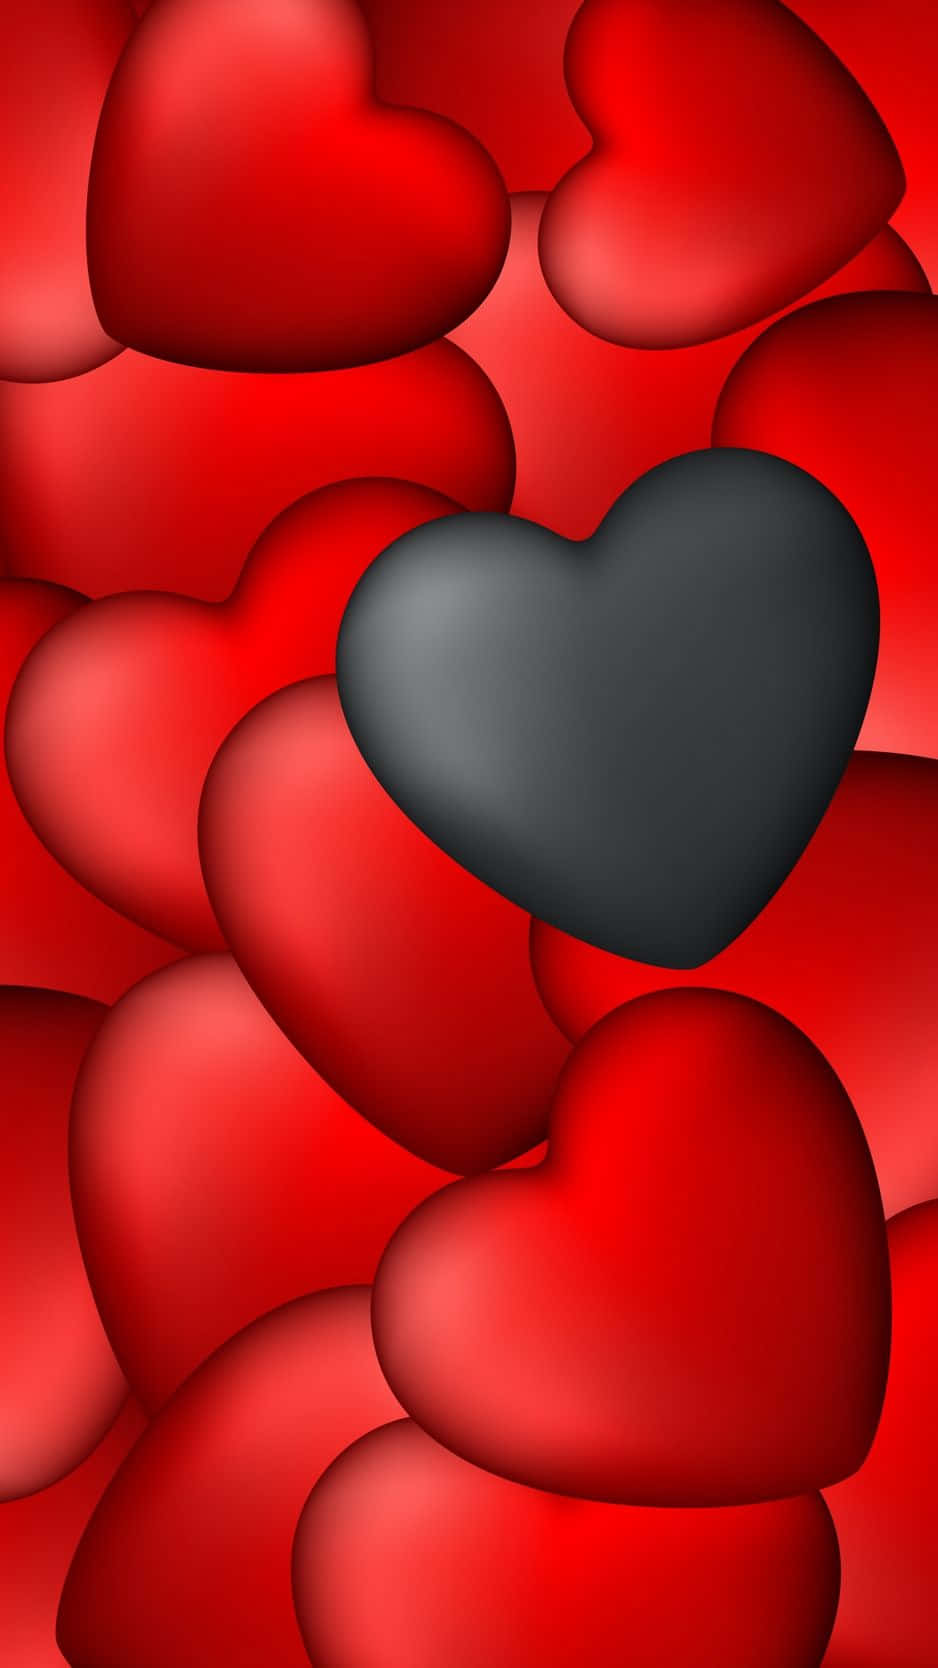 Red and white heart wallpaper HD wallpaper  Wallpaper Flare